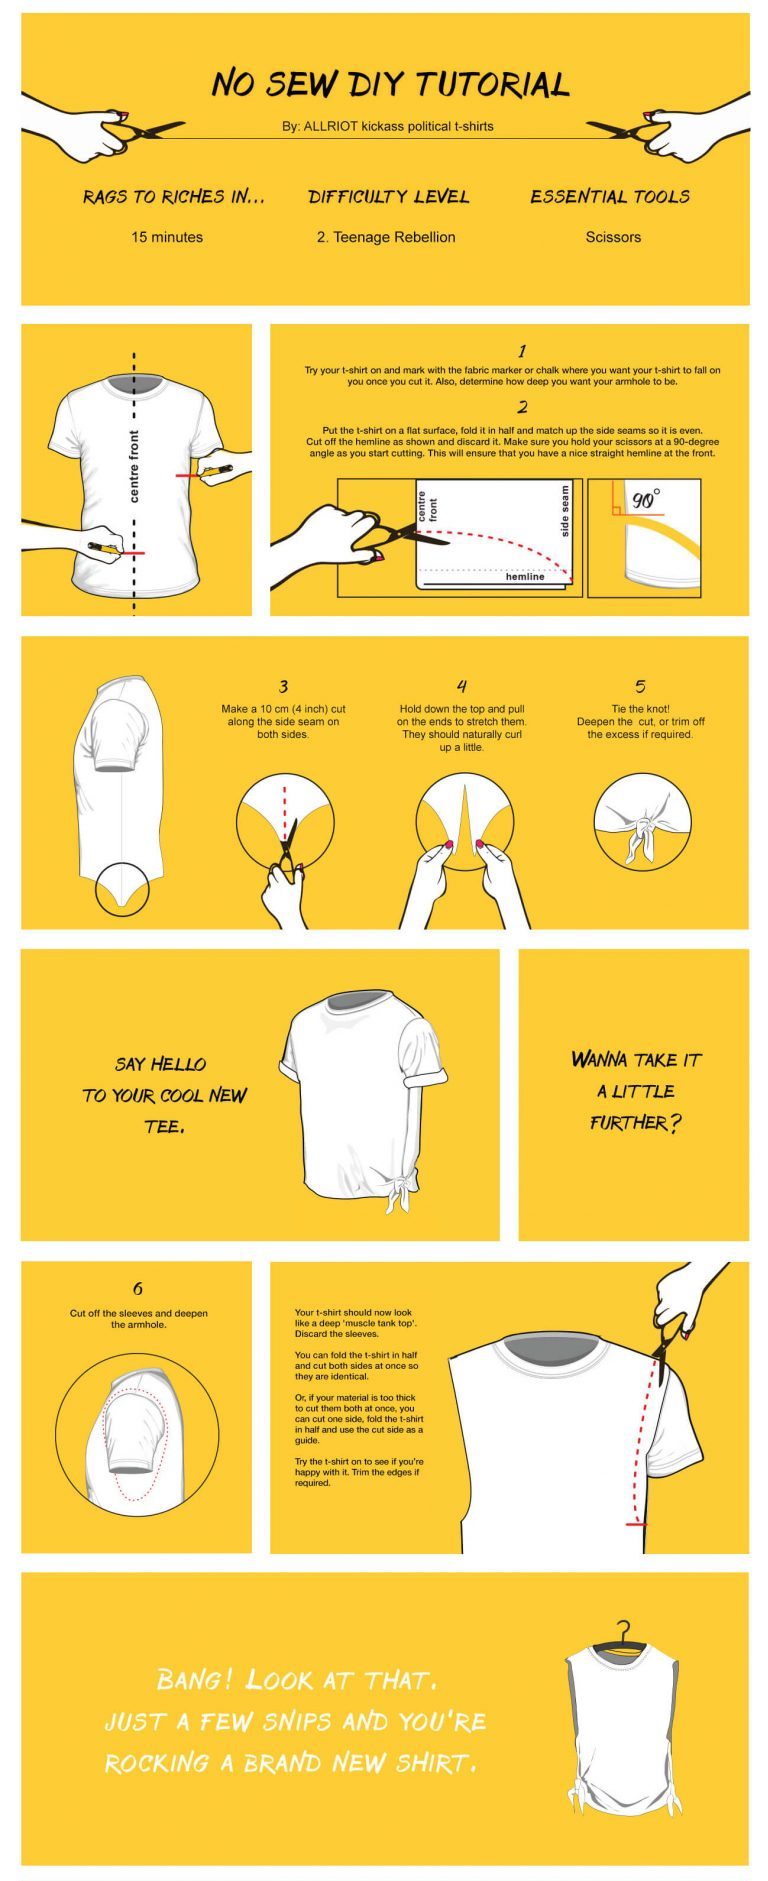 DIY-infographic-muscle-topt-shirt-cutting-instructions